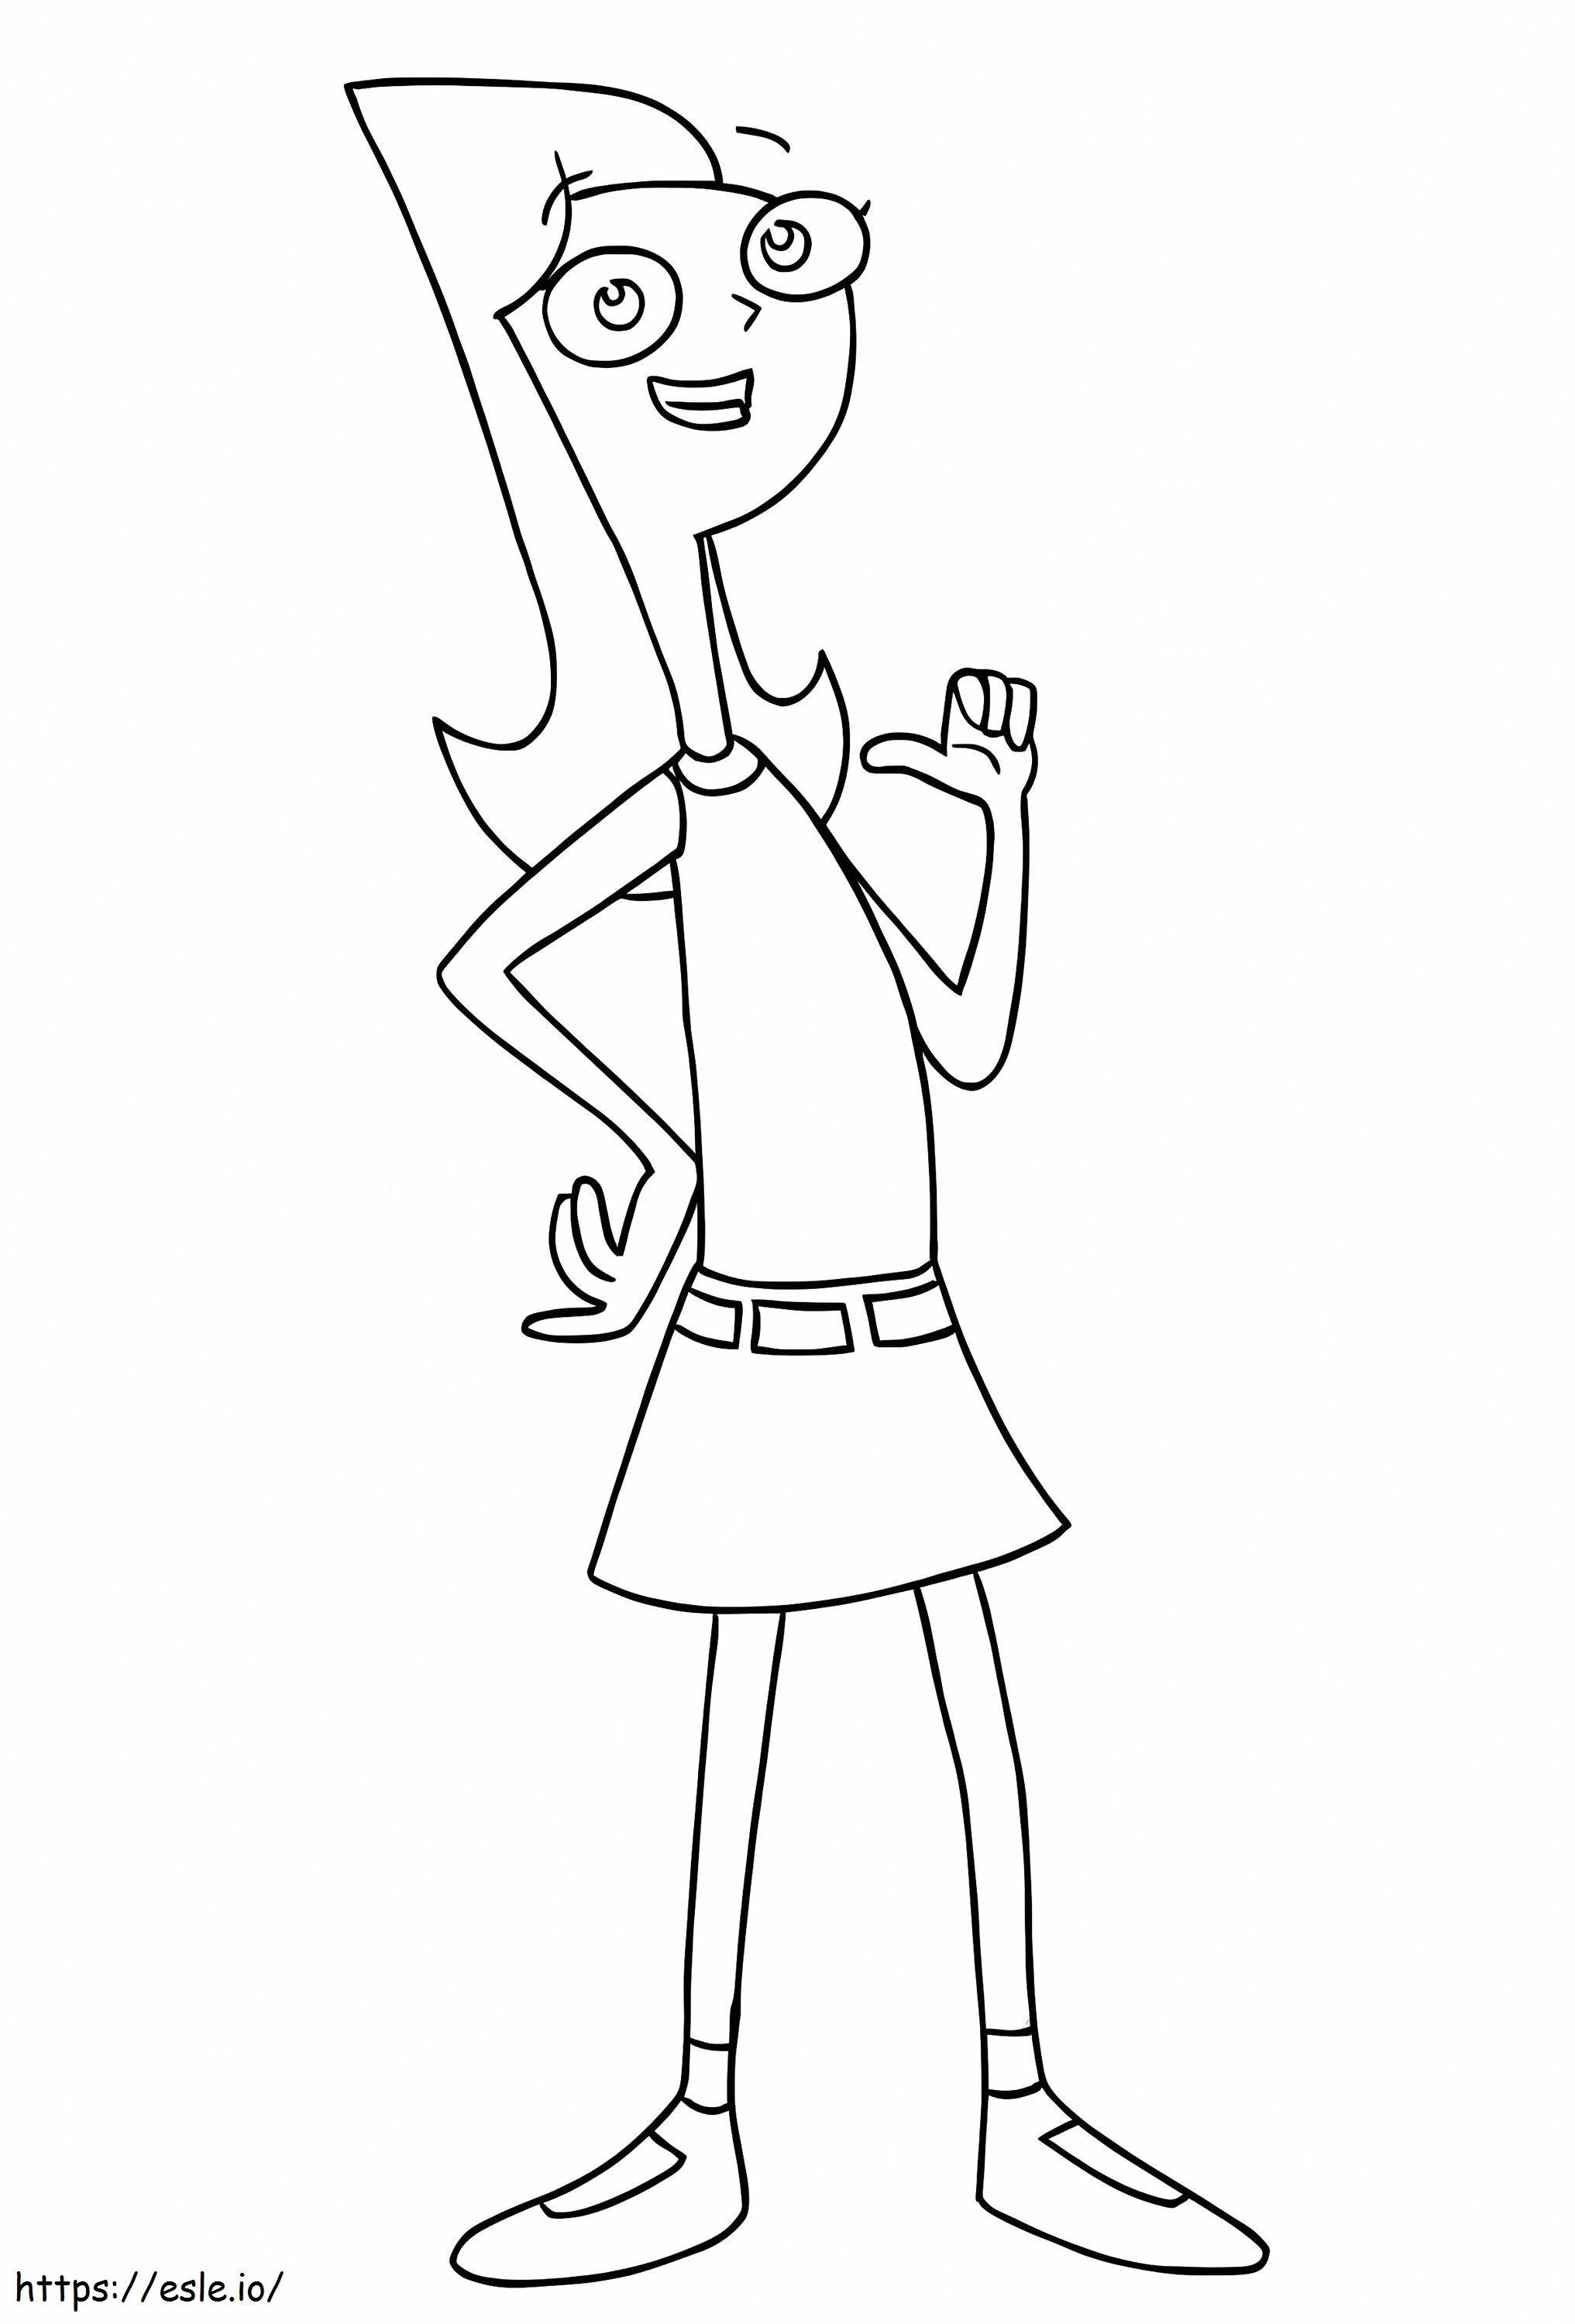 Impressive Candace coloring page